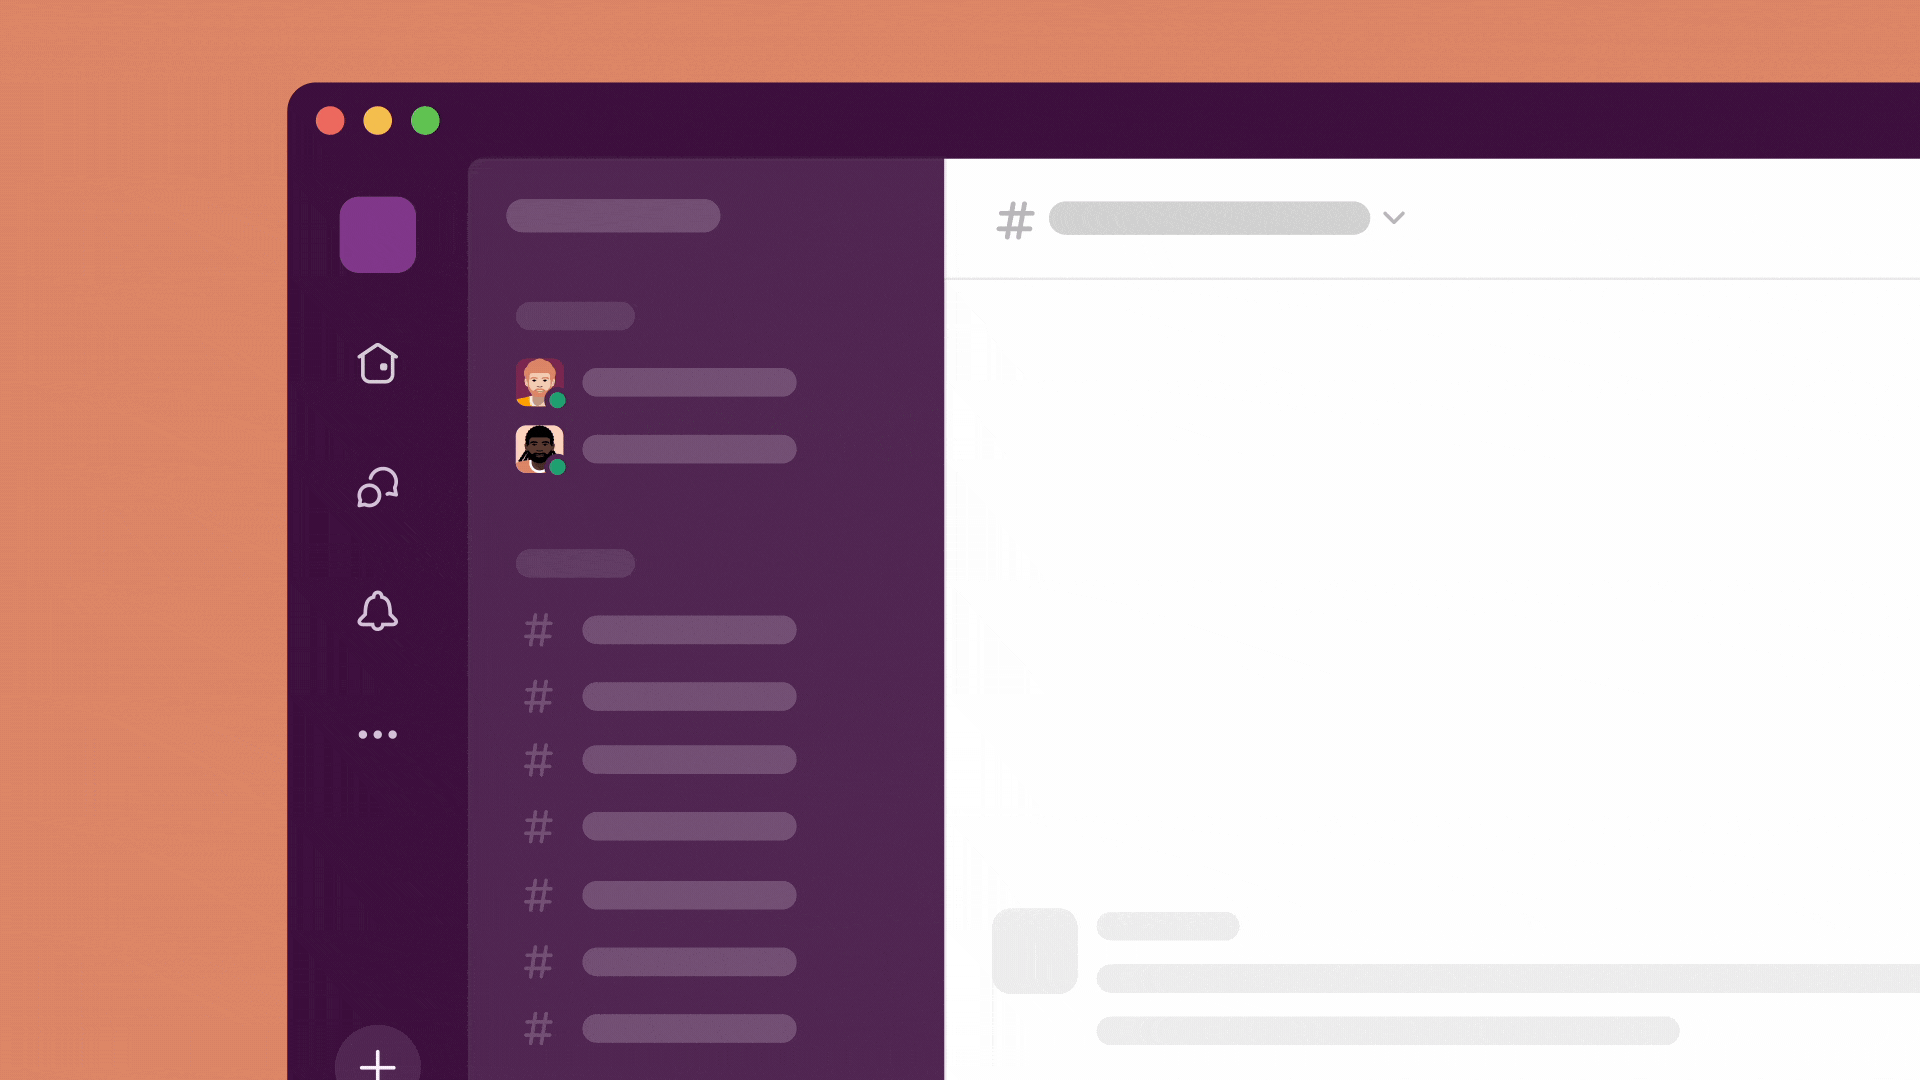 Organizing conversations in the Slack sidebar into customized sections